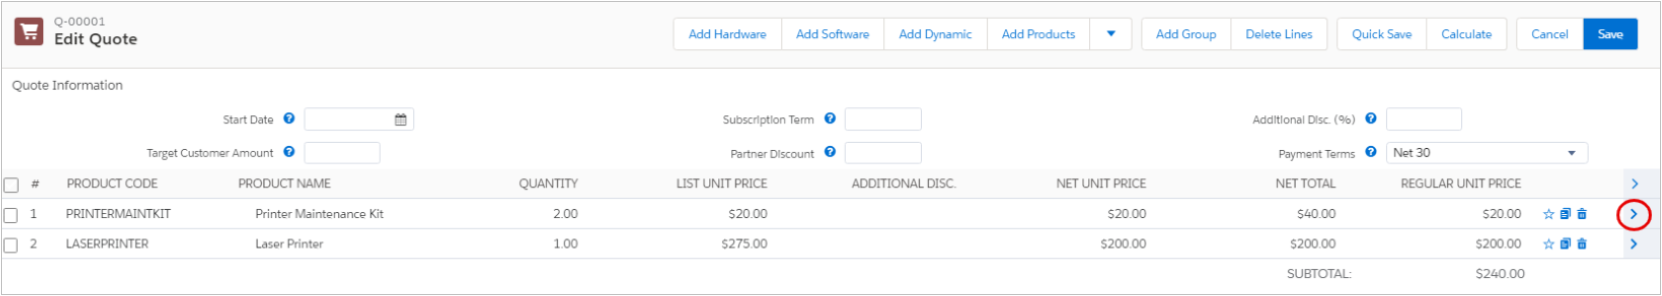 Salesforce CPQ Product Name, Quantity and Prices on Quote Line Editor